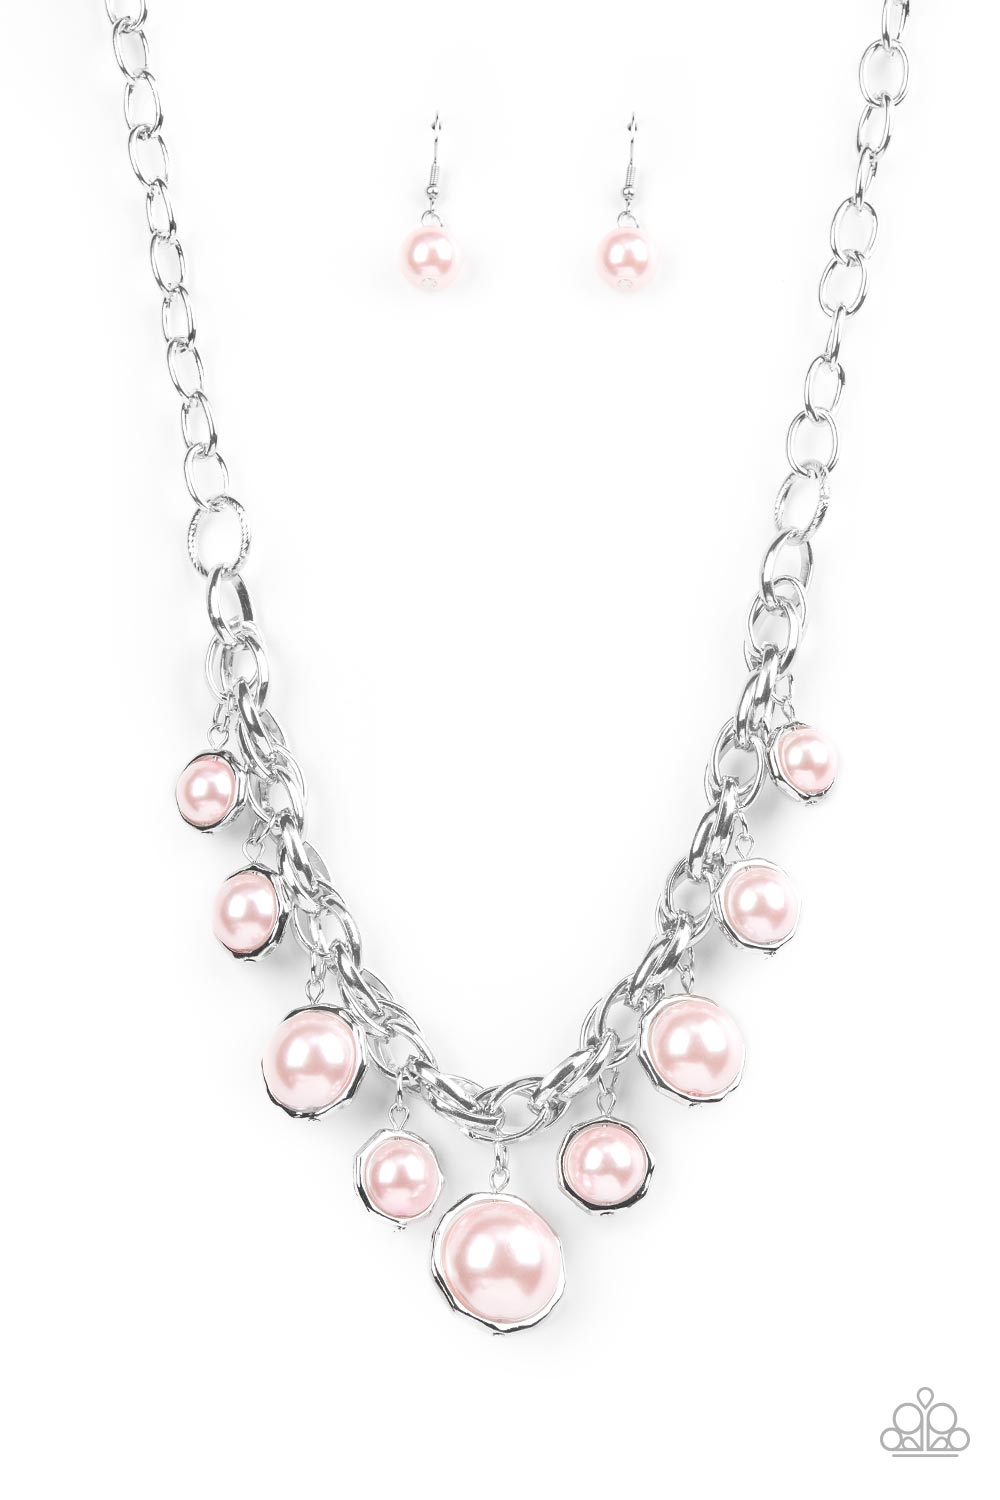 Revolving Refinement - Pink Pearl Necklaces luscious pink pearls are threaded along a rod inside imperfect silver rings and swing from a chunky section of double-linked silver chain, creating a dramatic display across the chest. Features an adjustable clasp closure.  Sold as one individual necklace. Includes one pair of matching earrings.  Get The Complete Look! Bracelet: "Orbiting Opulence - Pink" (Sold Separately)